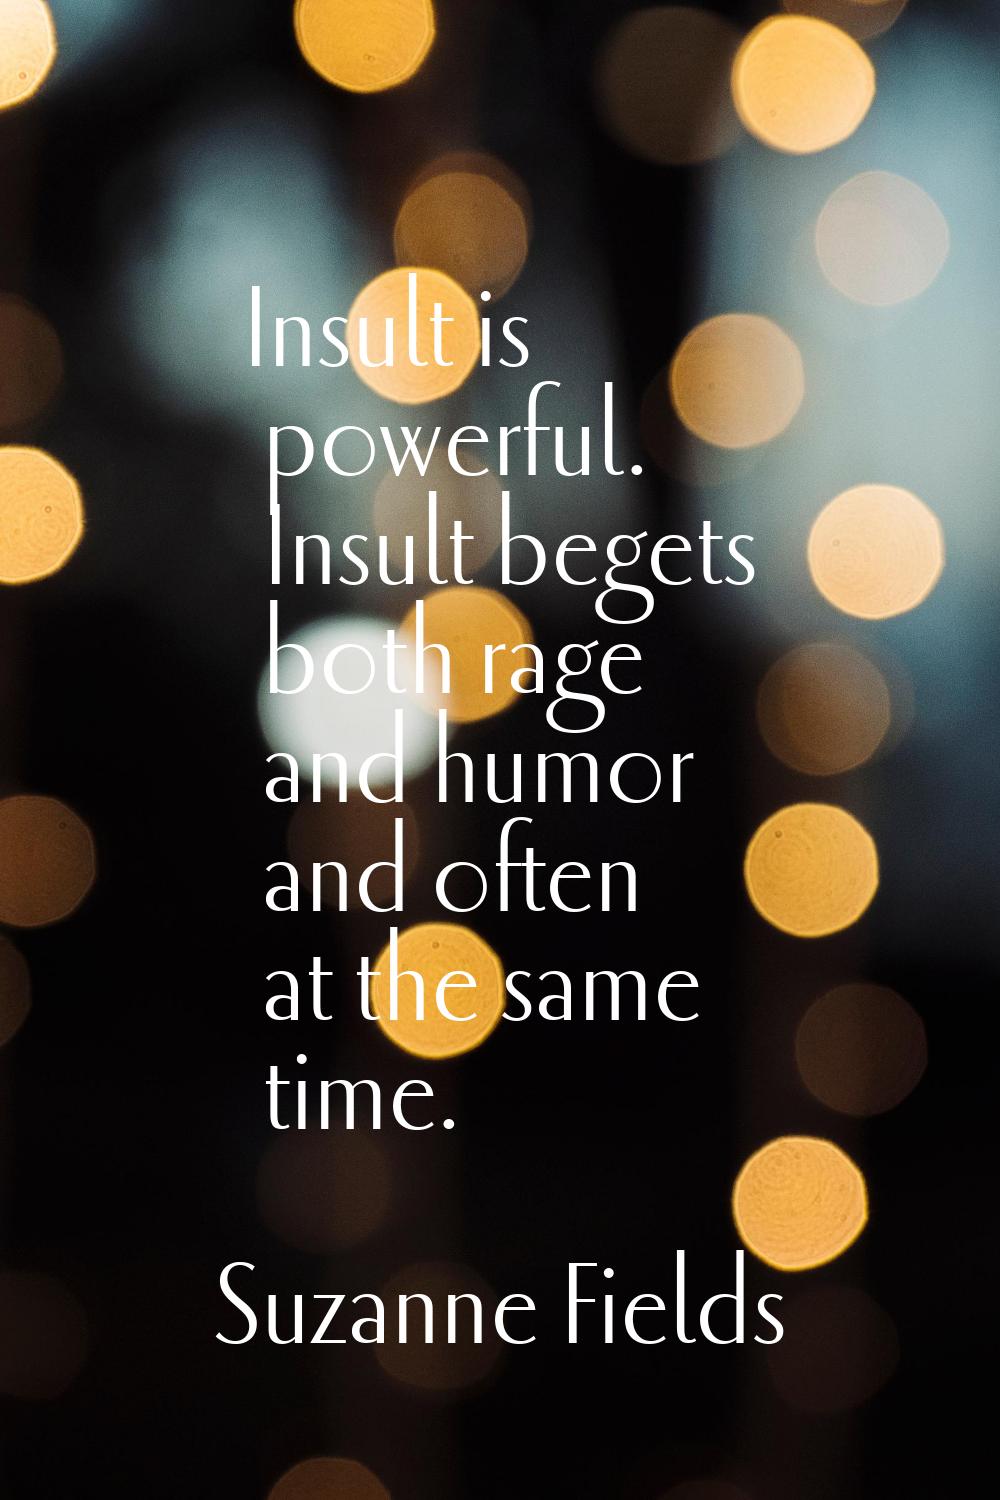 Insult is powerful. Insult begets both rage and humor and often at the same time.